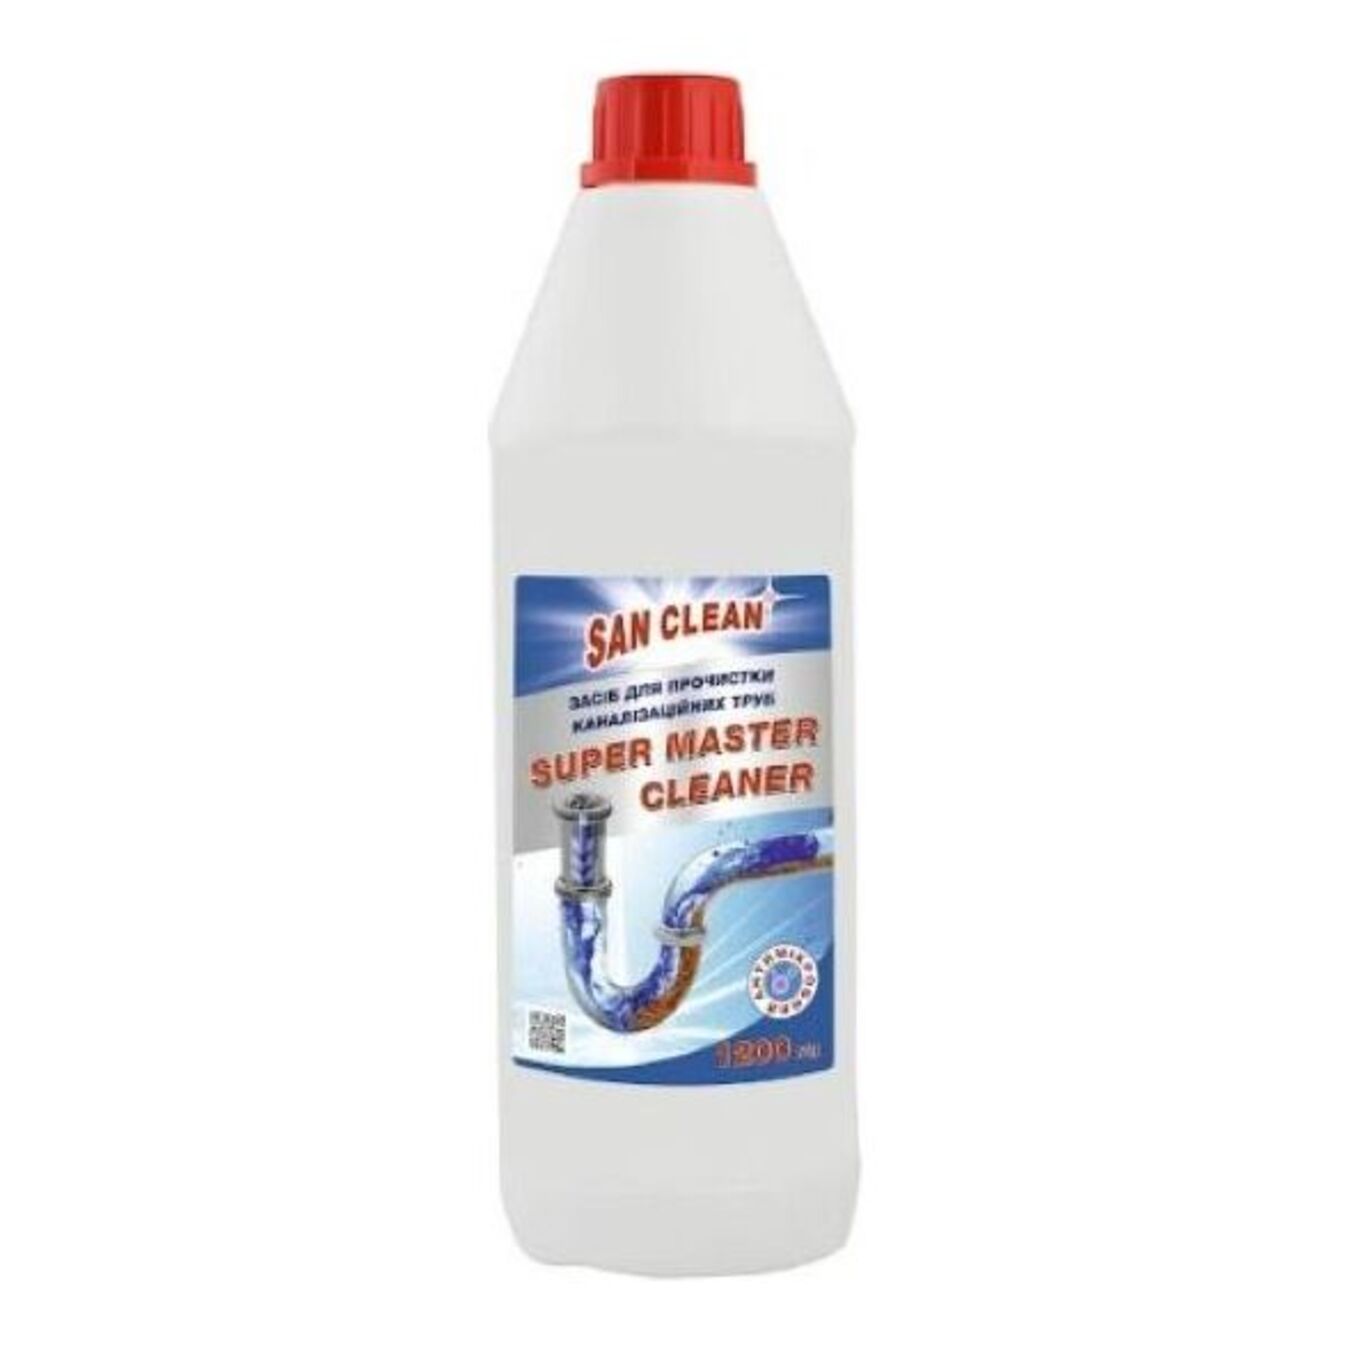 San-Clean Super Master Cleaner for cleaning pipes 1200ml